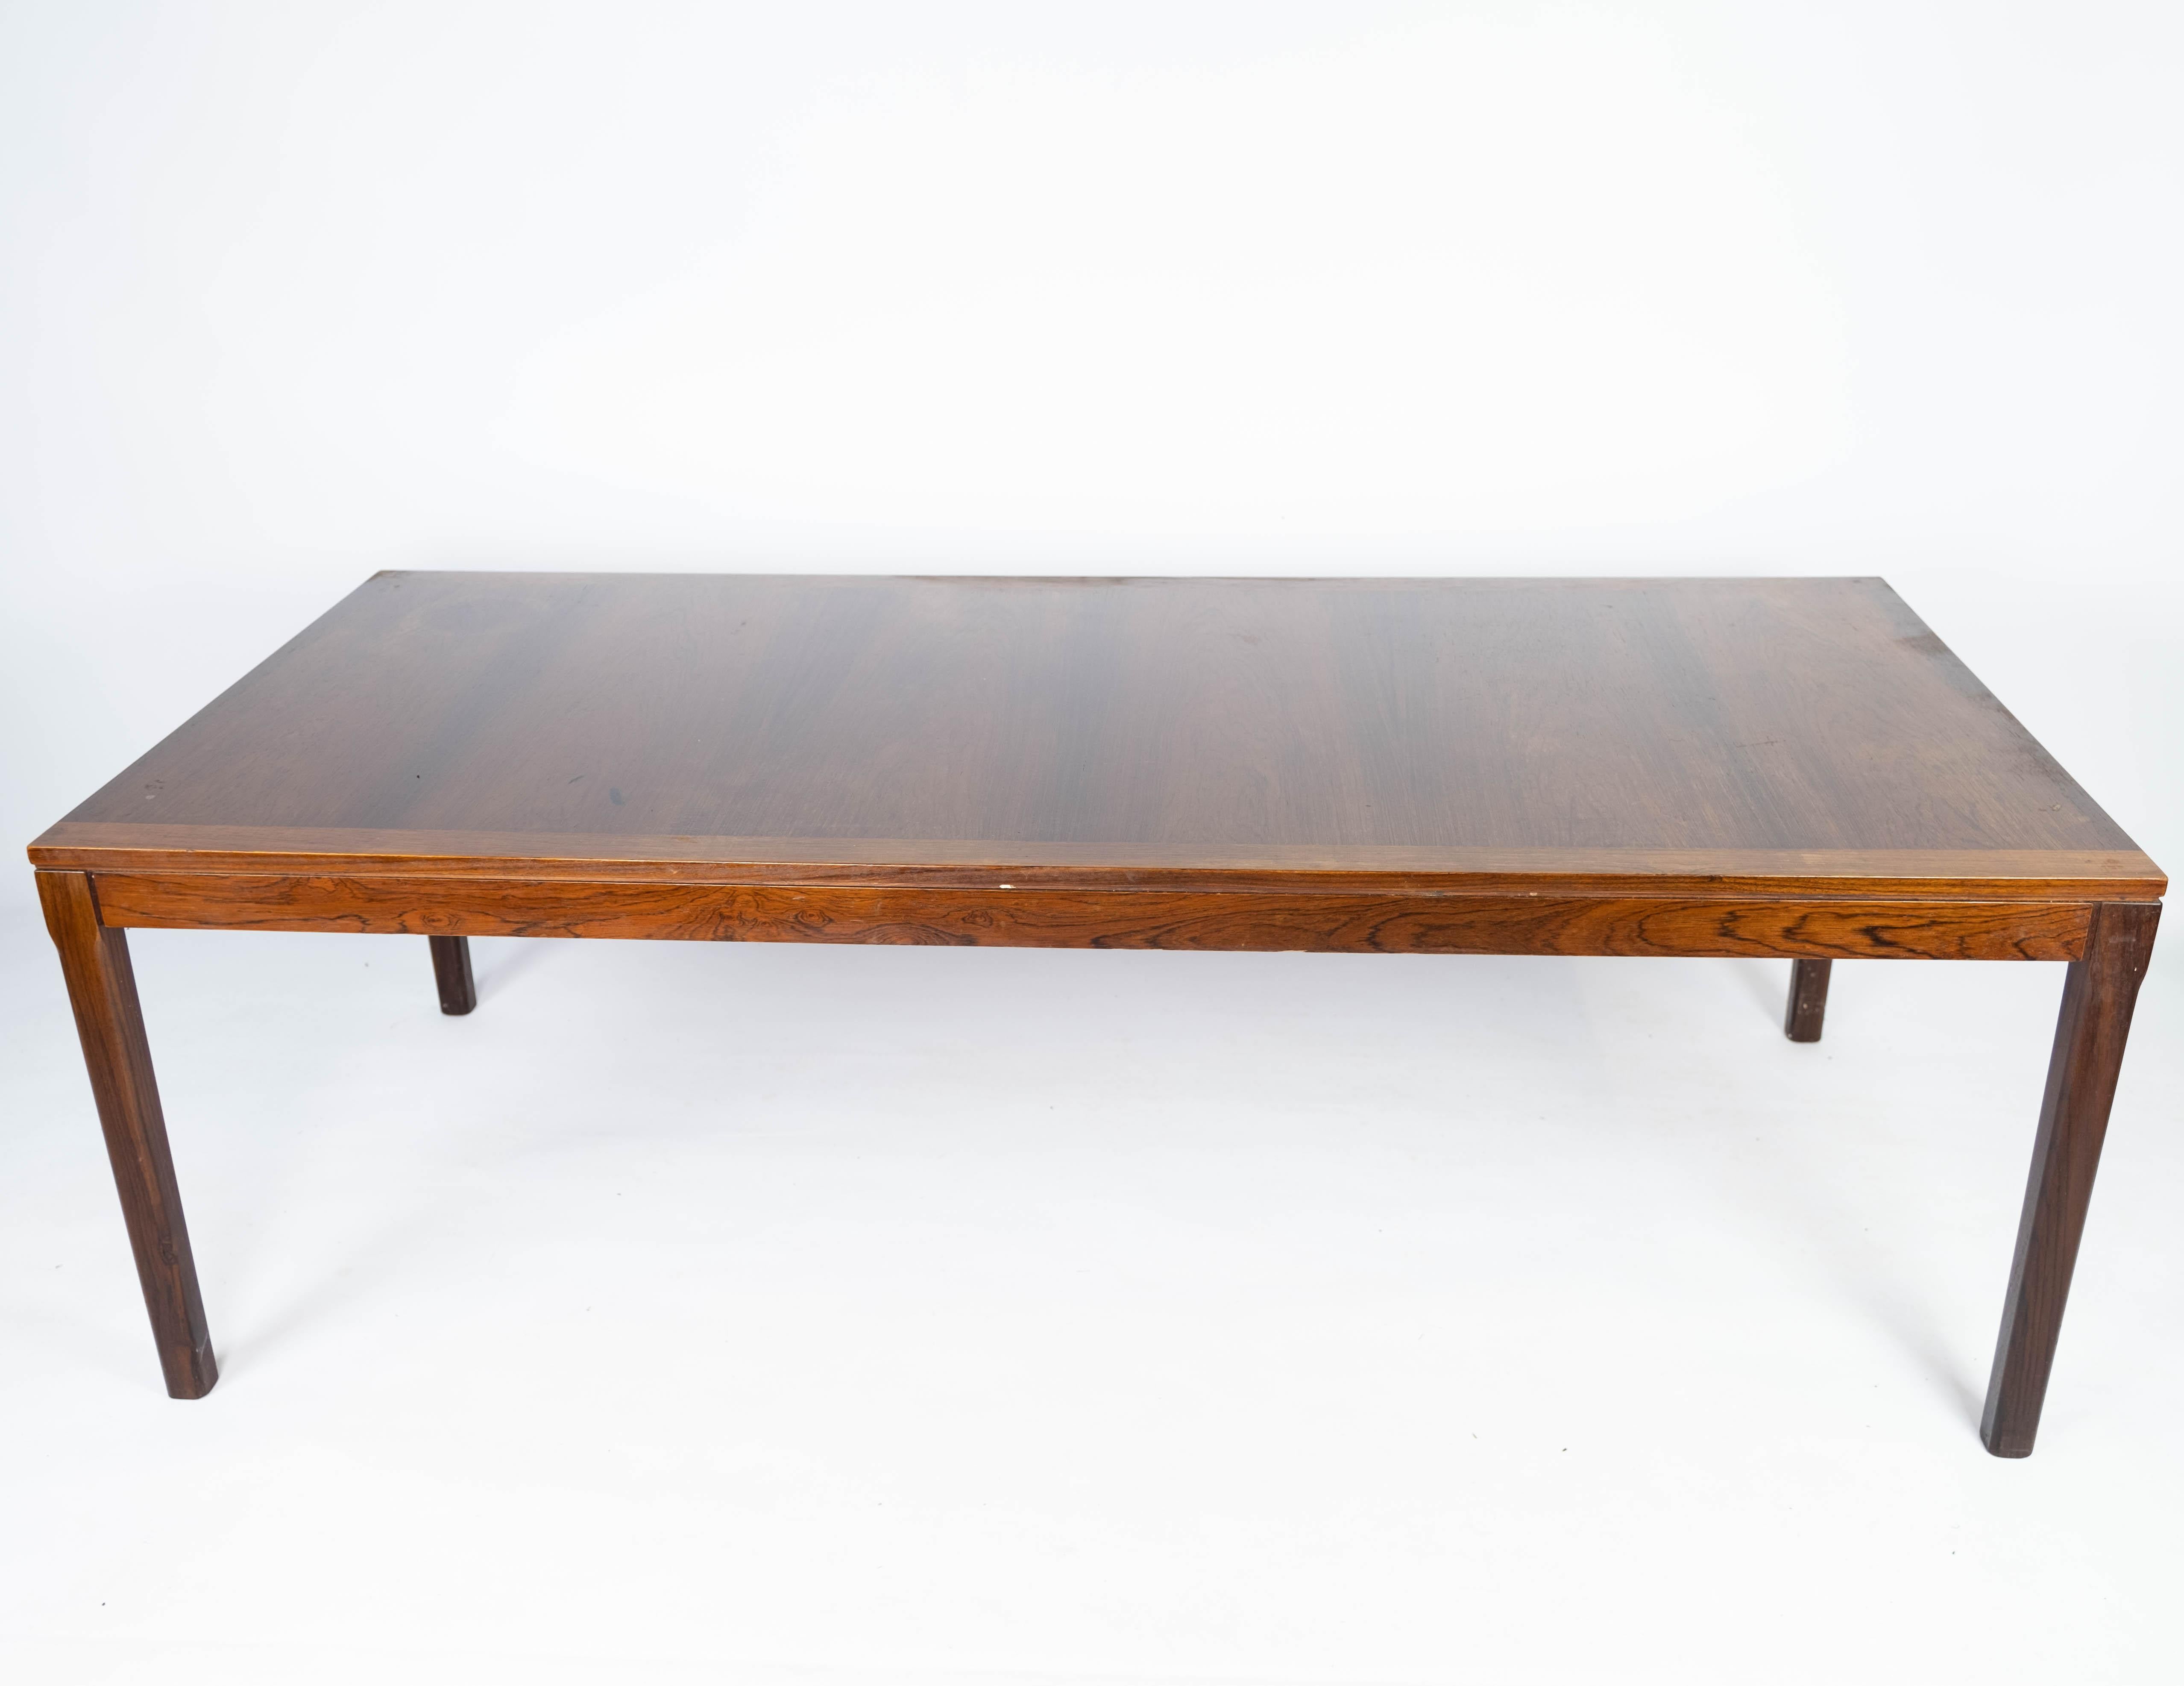 This rosewood coffee table epitomizes the elegance and craftsmanship of Danish design from the 1960s. Crafted with precision and attention to detail, it boasts a timeless appeal that adds sophistication to any living space.

The rich tones and grain